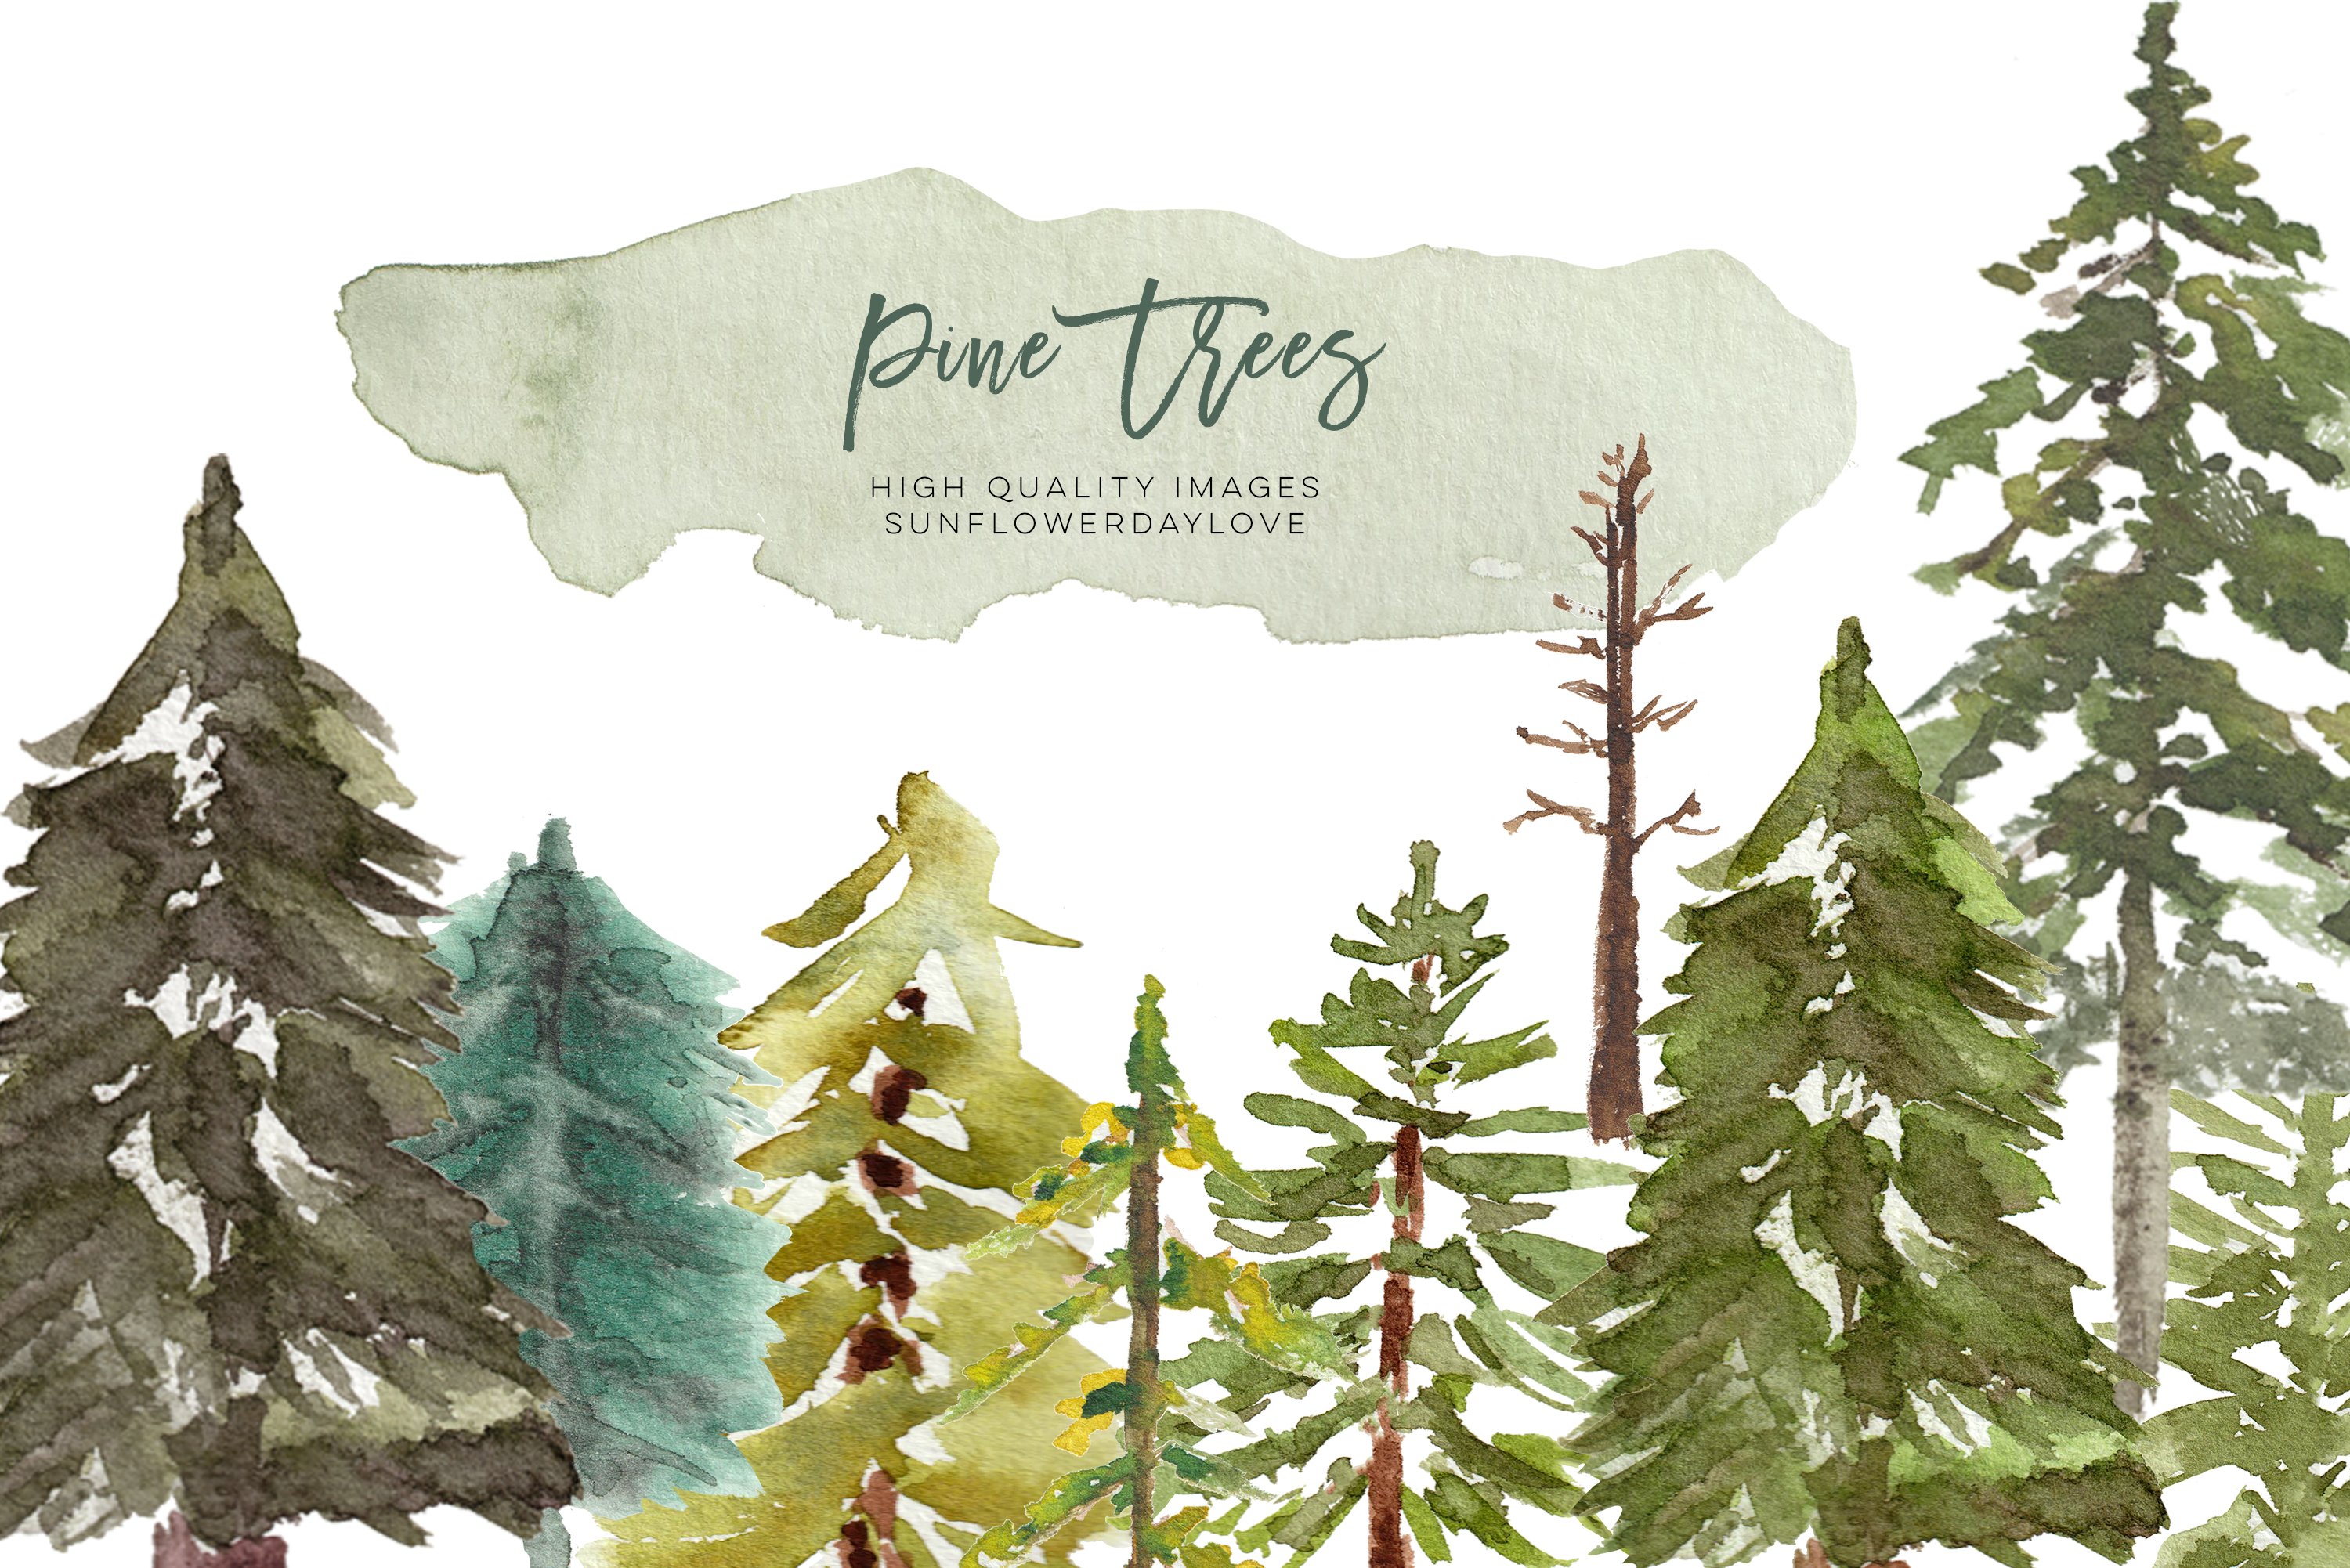 Watercolor painting of a forest with pine trees by Pia Fries.